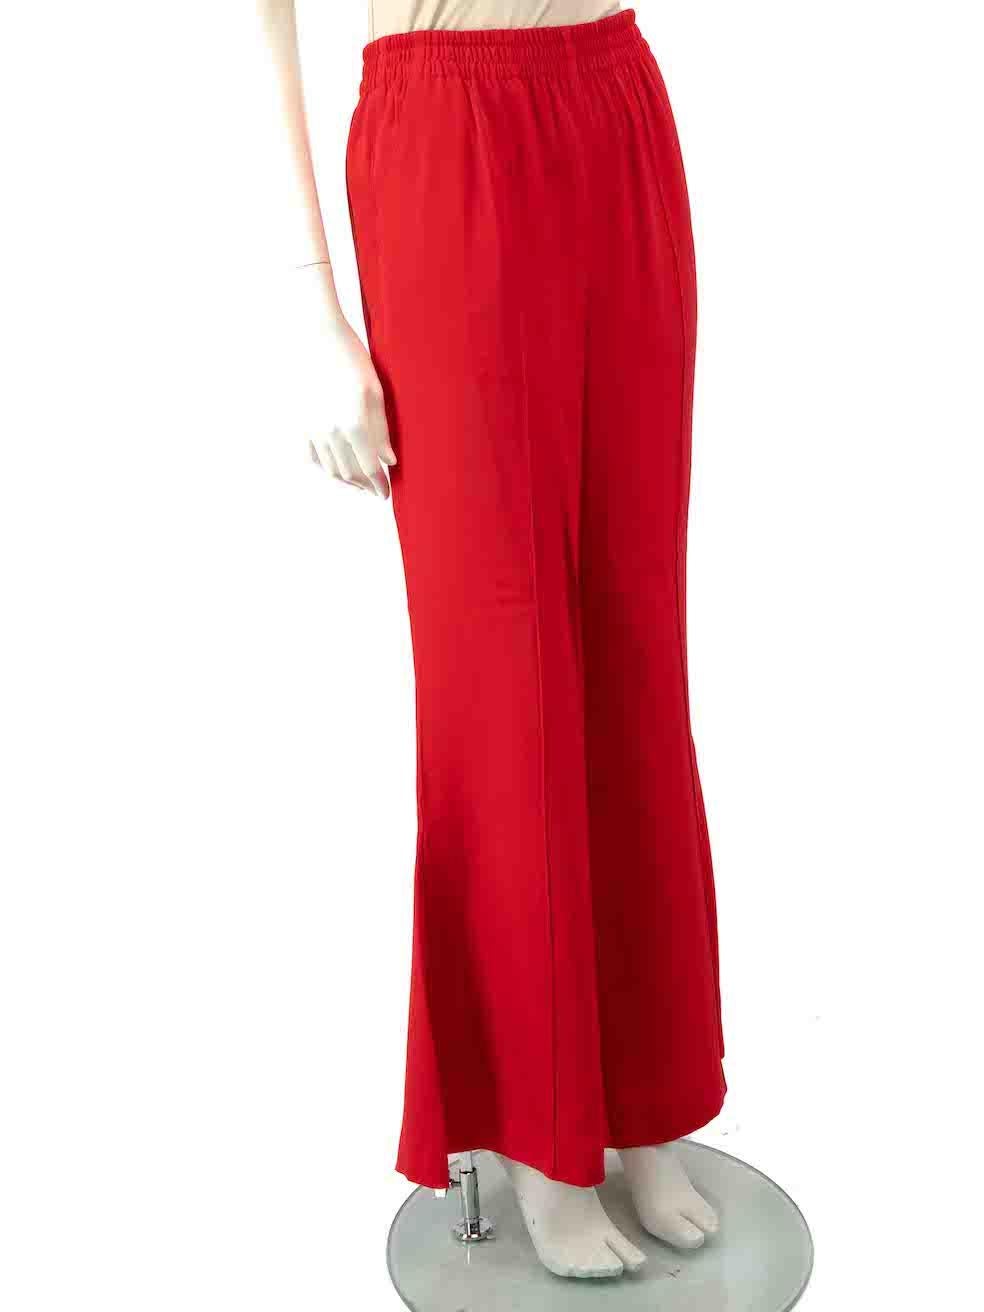 CONDITION is Very good. Hardly any visible wear to trousers is evident on this used La Ligne designer resale item.
 
 
 
 Details
 
 
 Red
 
 Silk
 
 Trousers
 
 Wide leg
 
 Elasticated waistband
 
 2x Side pockets
 
 Leg slit
 
 
 
 
 
 Made in